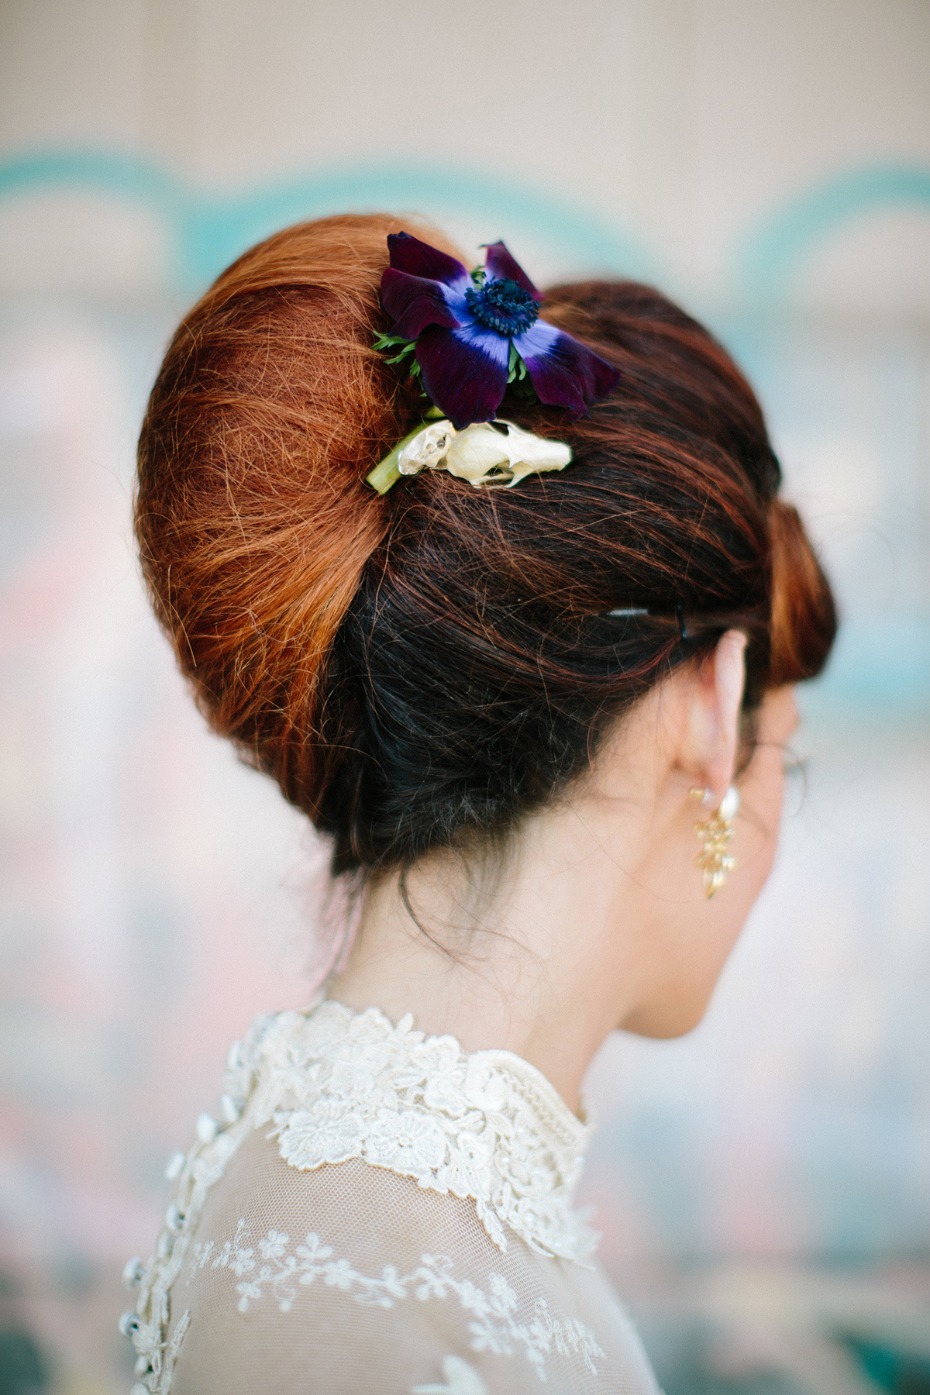 Skull and flower hair accessory for the bride